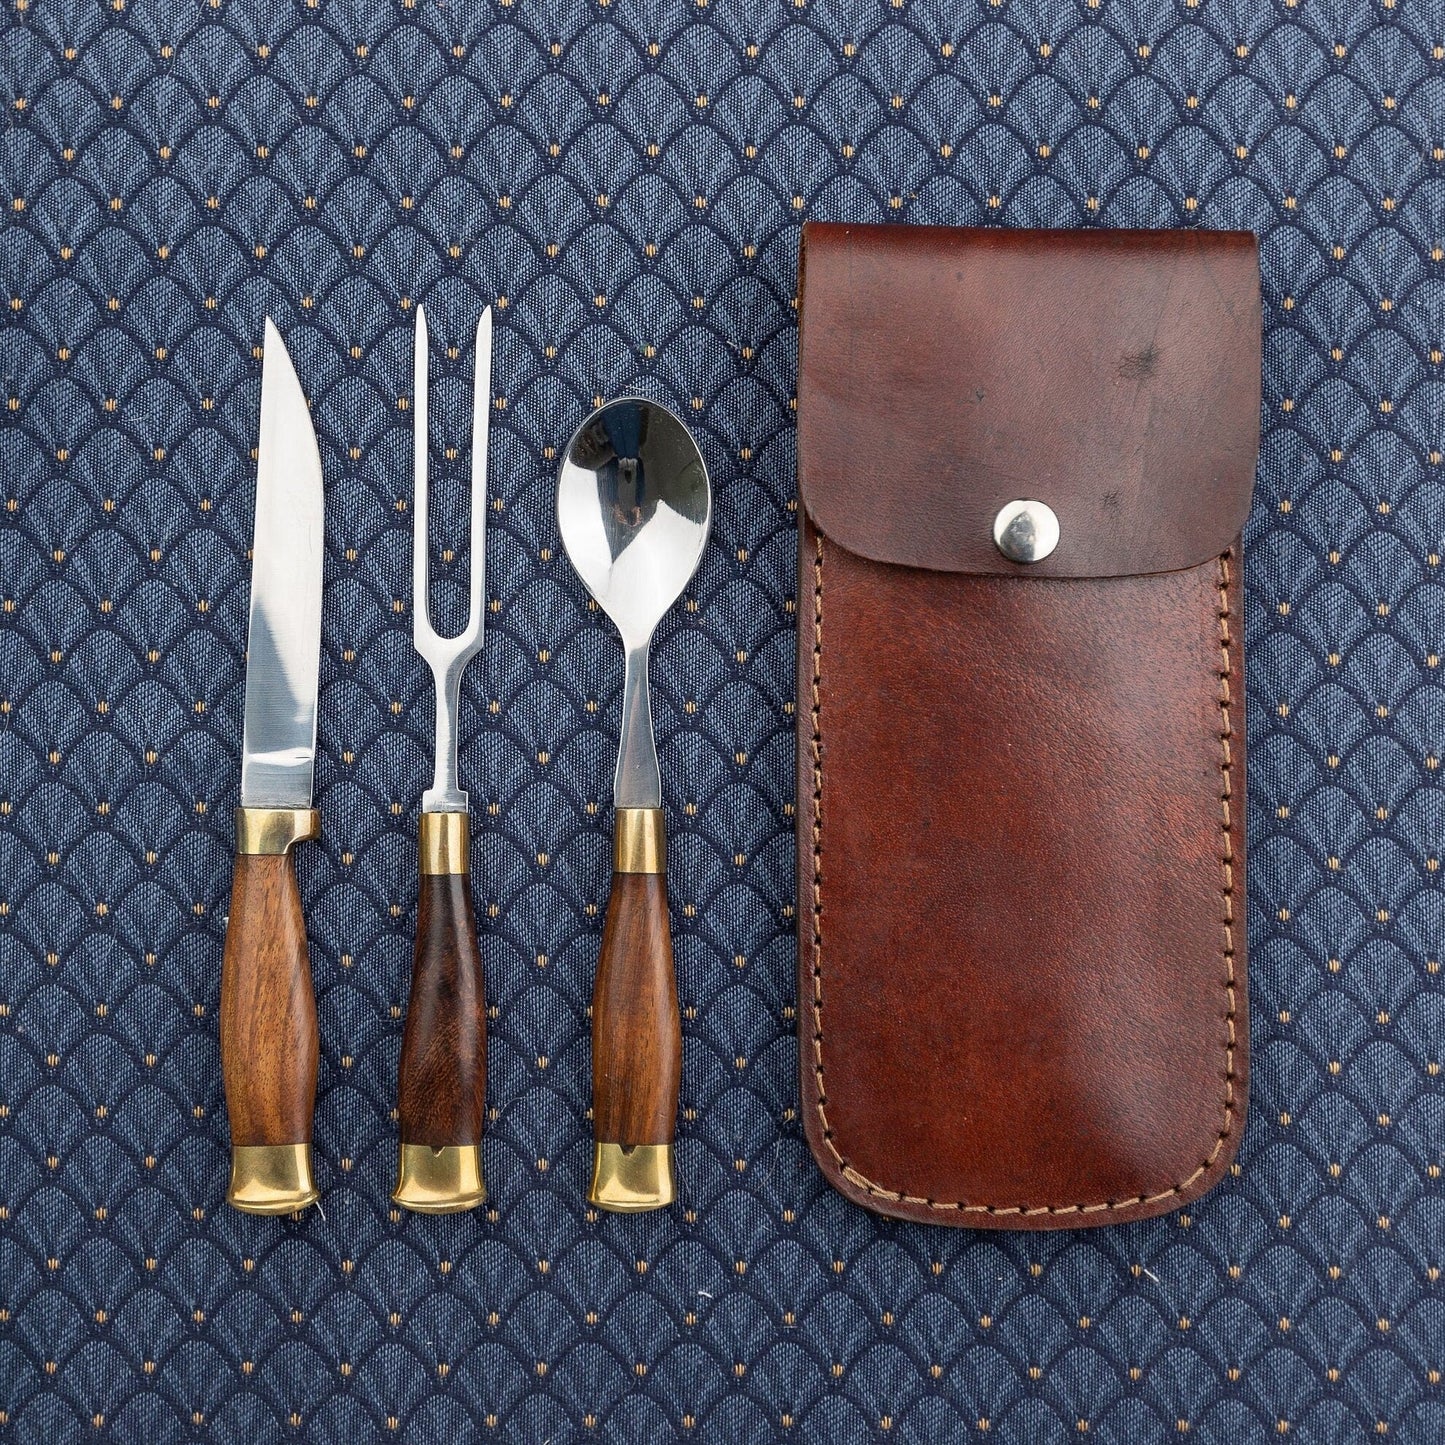 Wood cutlery set with brown leather case that attaches to belt.